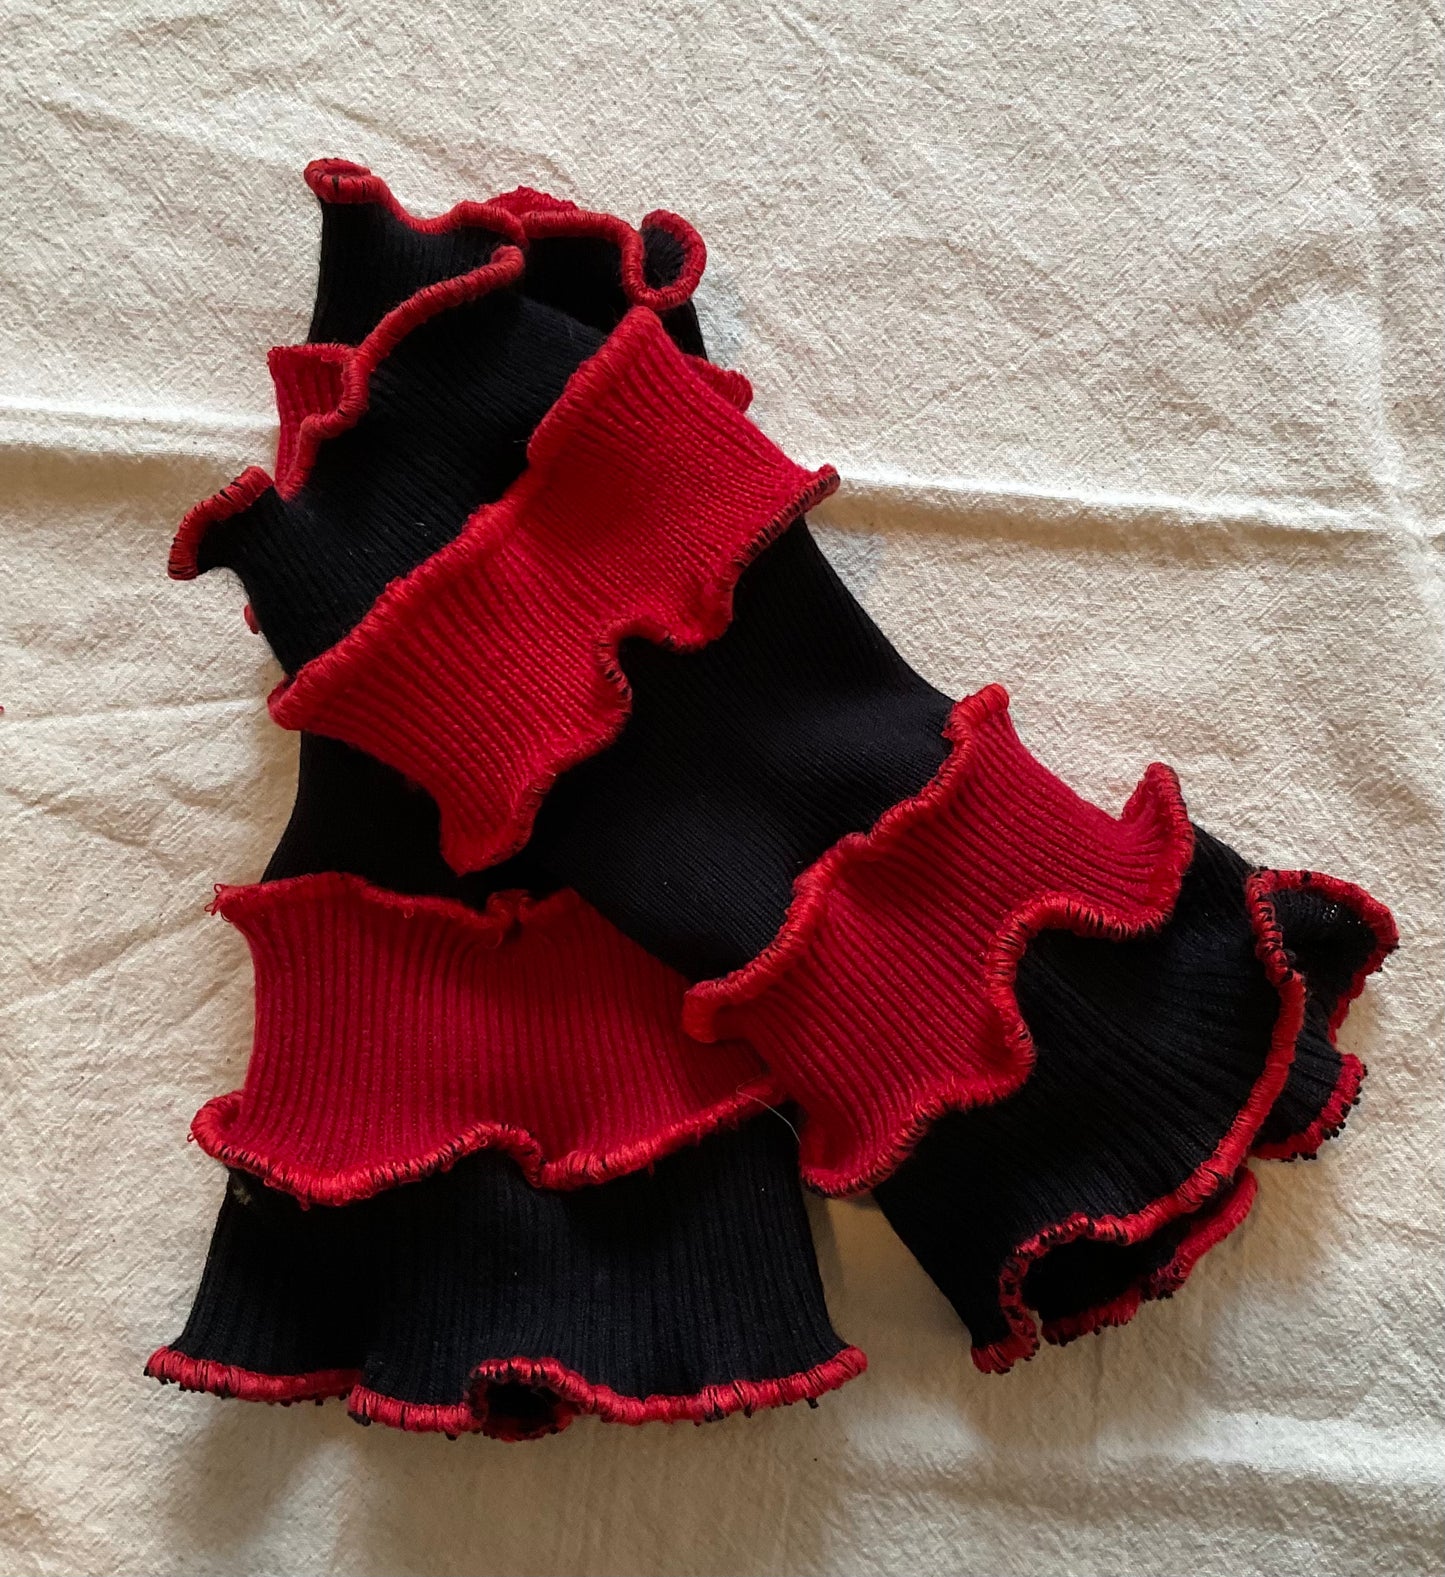 Black & Red Arm Warmers